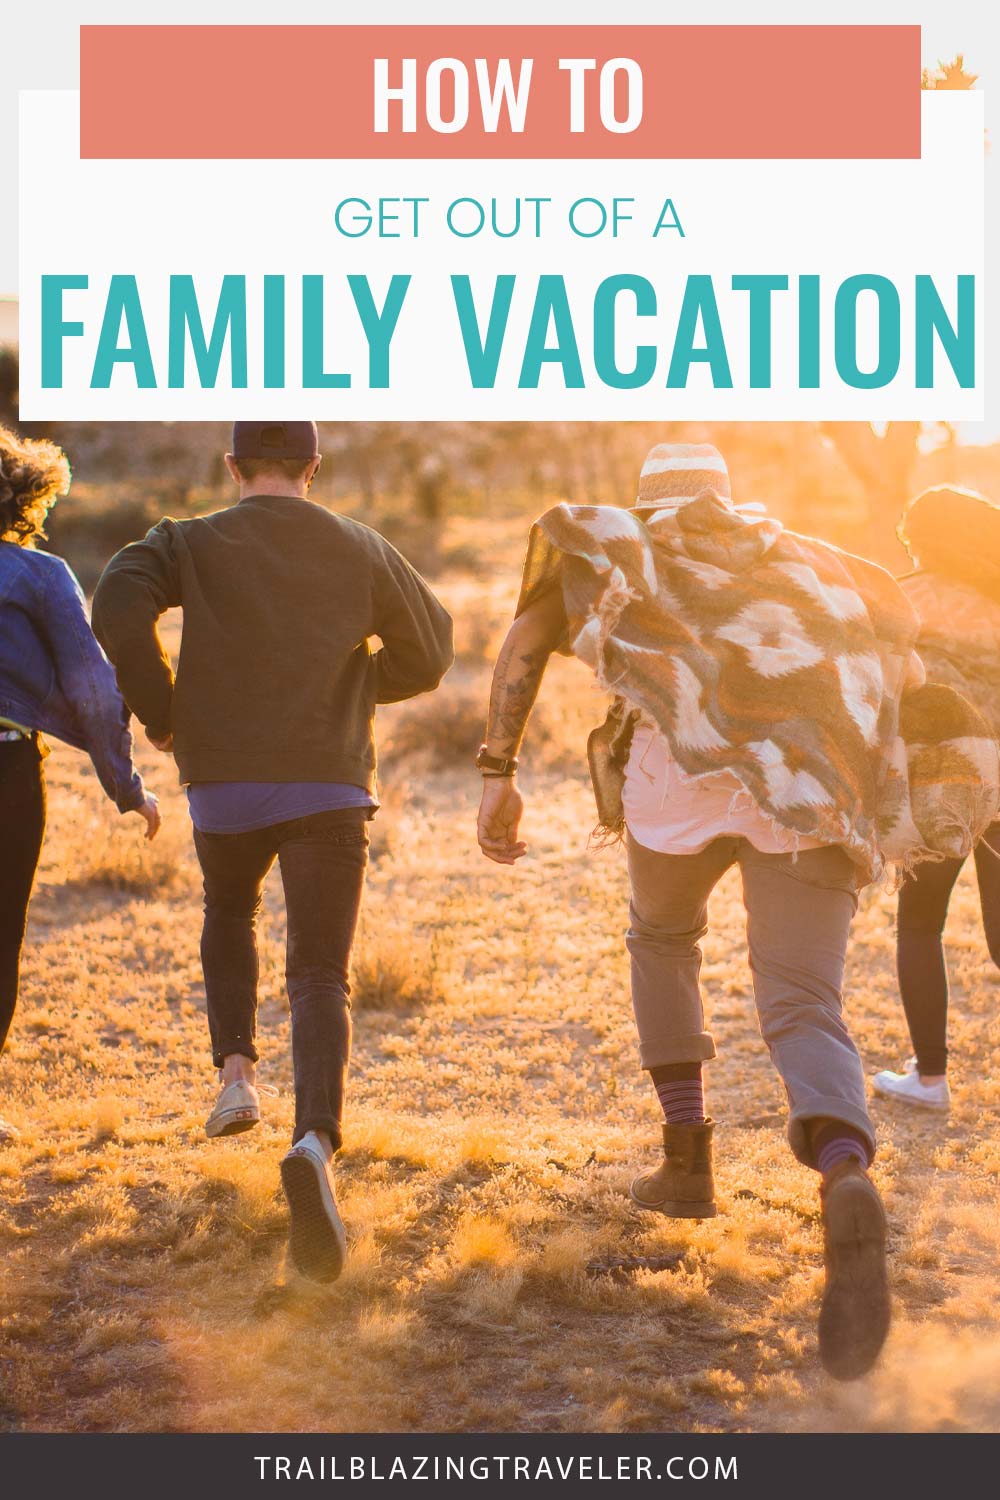 Four people running during sunset - How to Get Out of a Family Vacation?